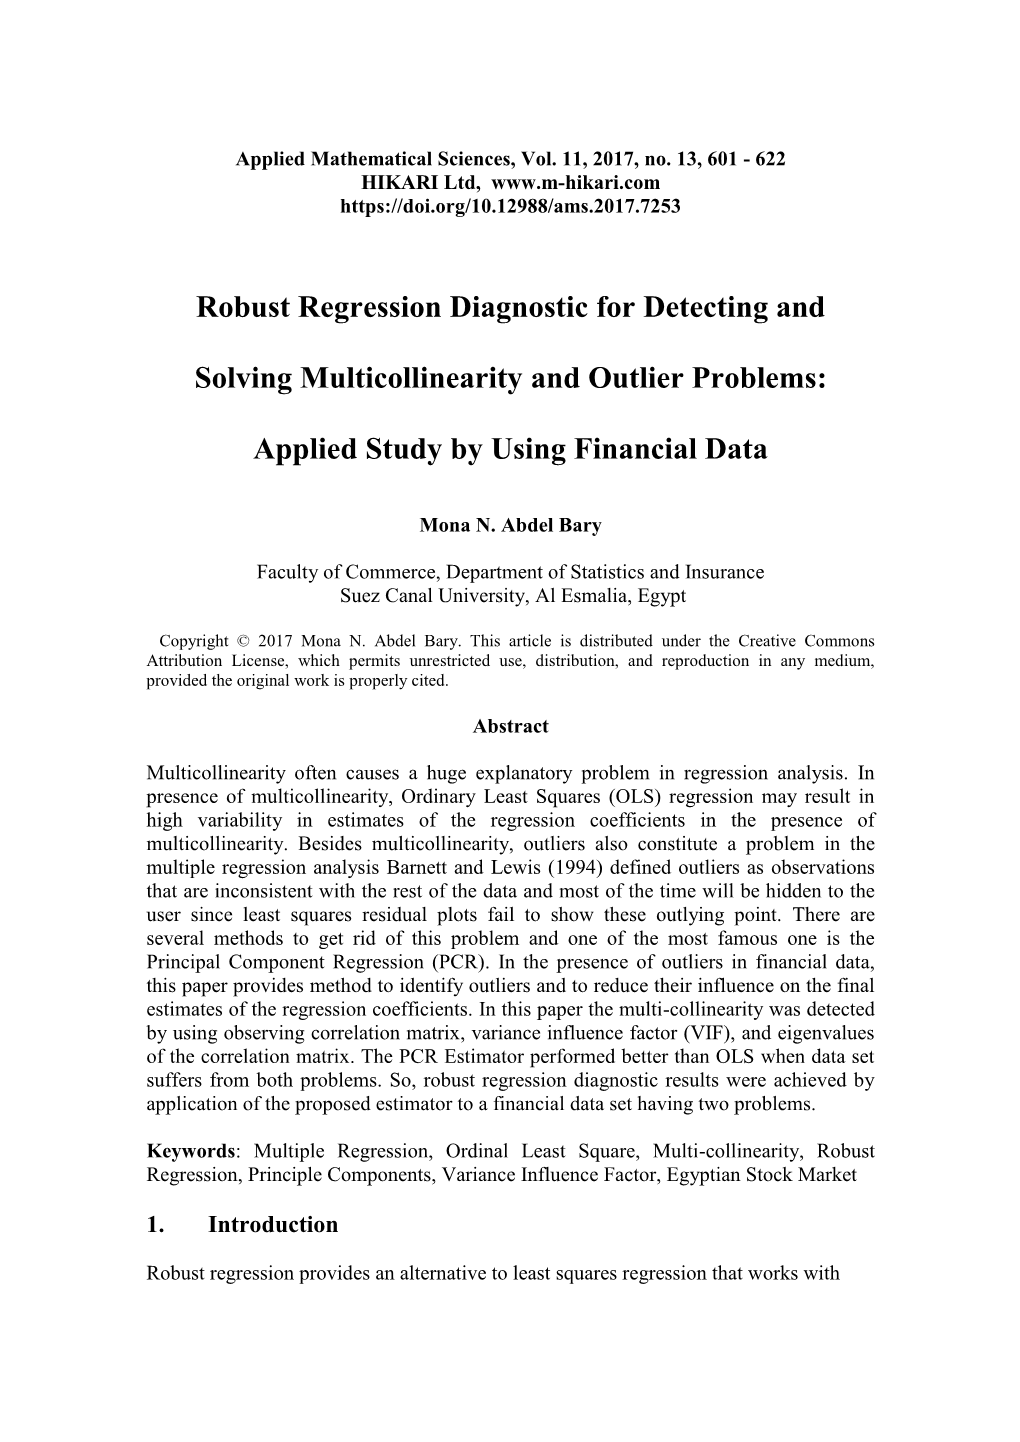 Robust Regression Diagnostic for Detecting and Solving